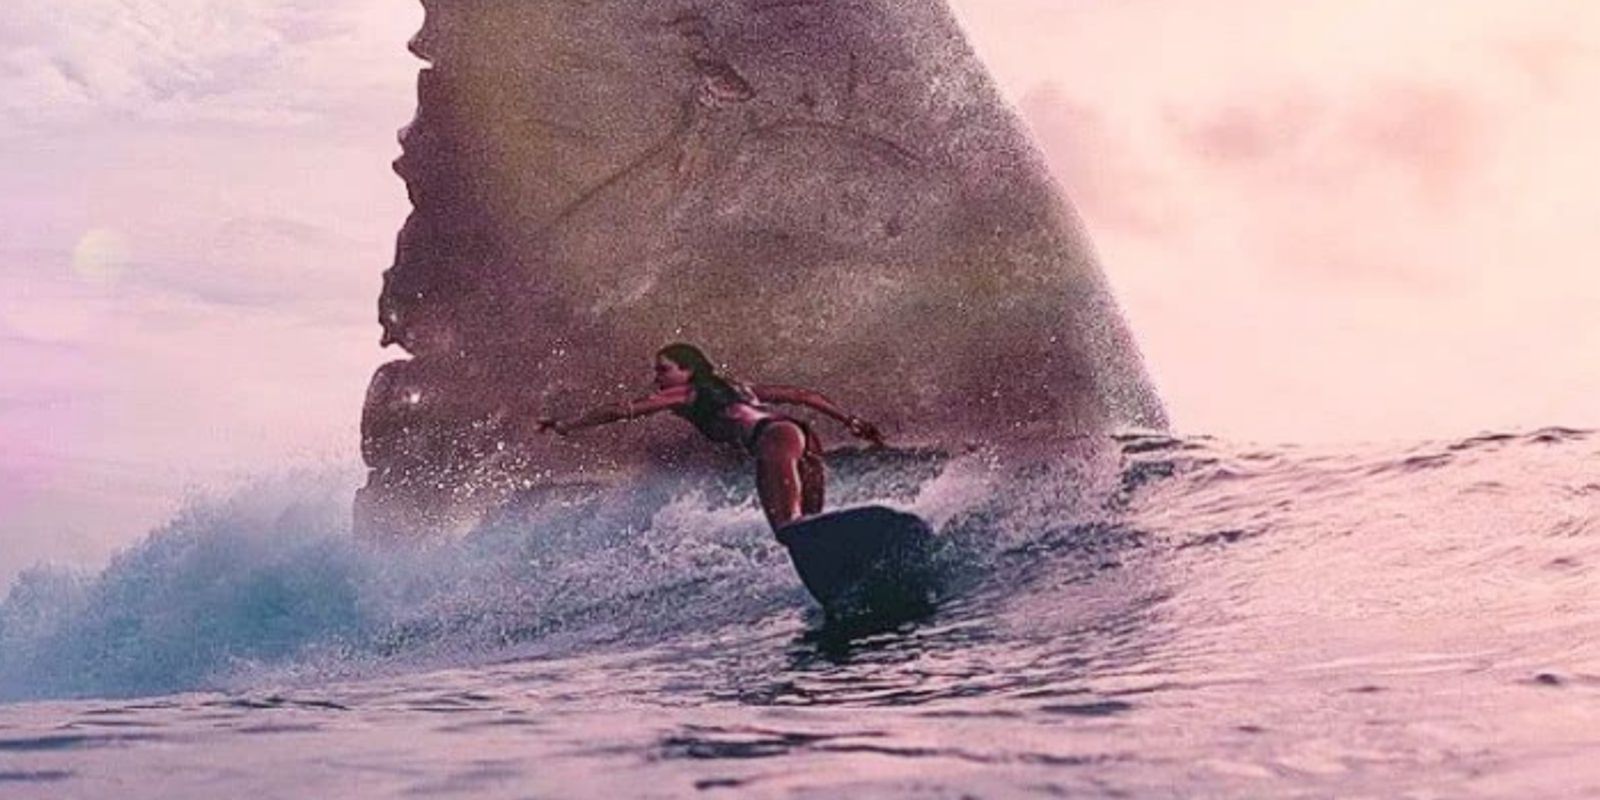 A woman surfing in Meg 2: The Trench trailer.